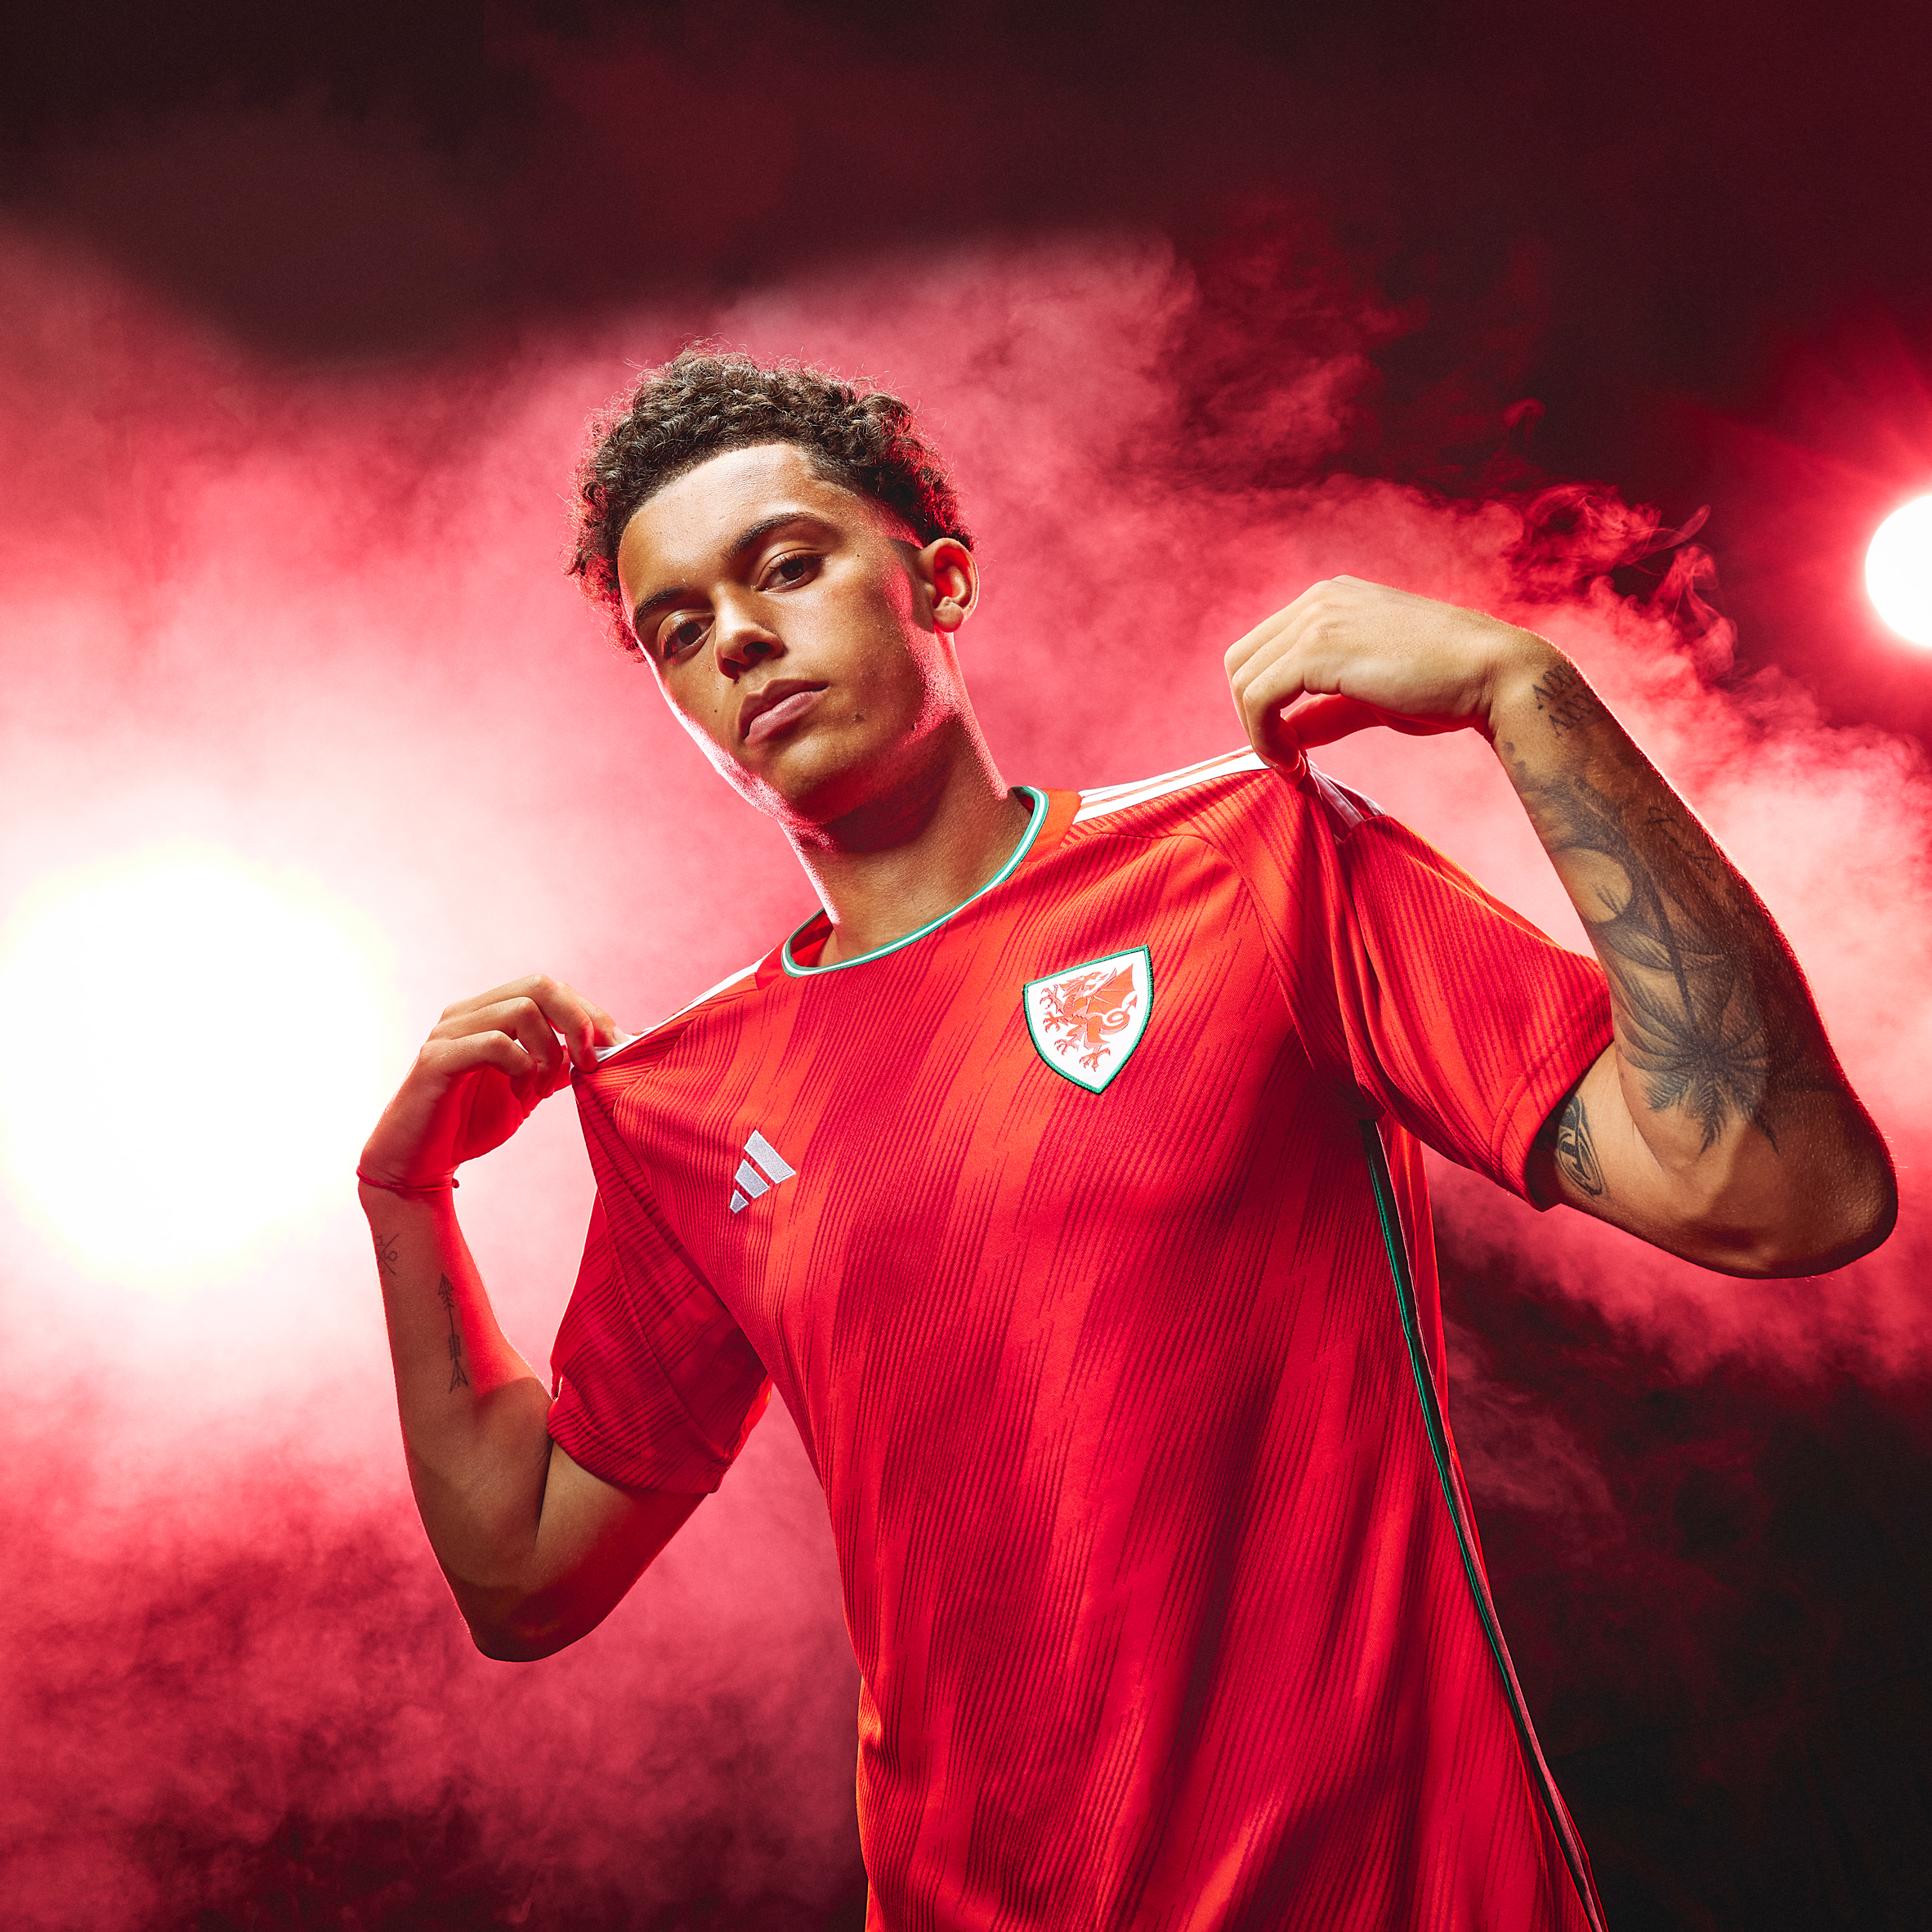 A model wearing a red football top